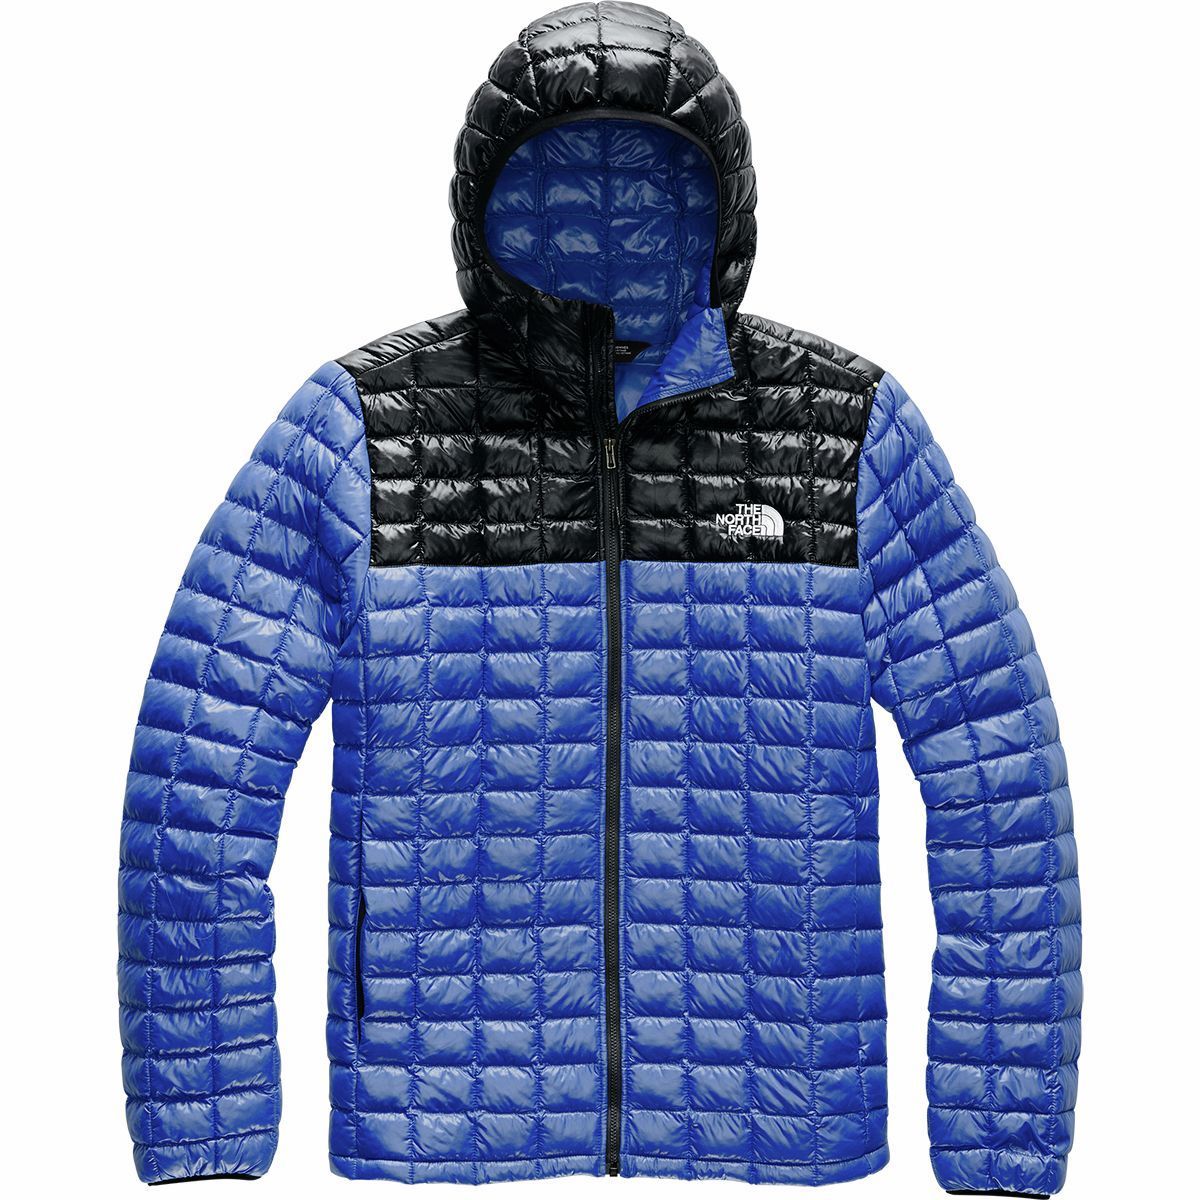 north face men's thermoball jacket with hood